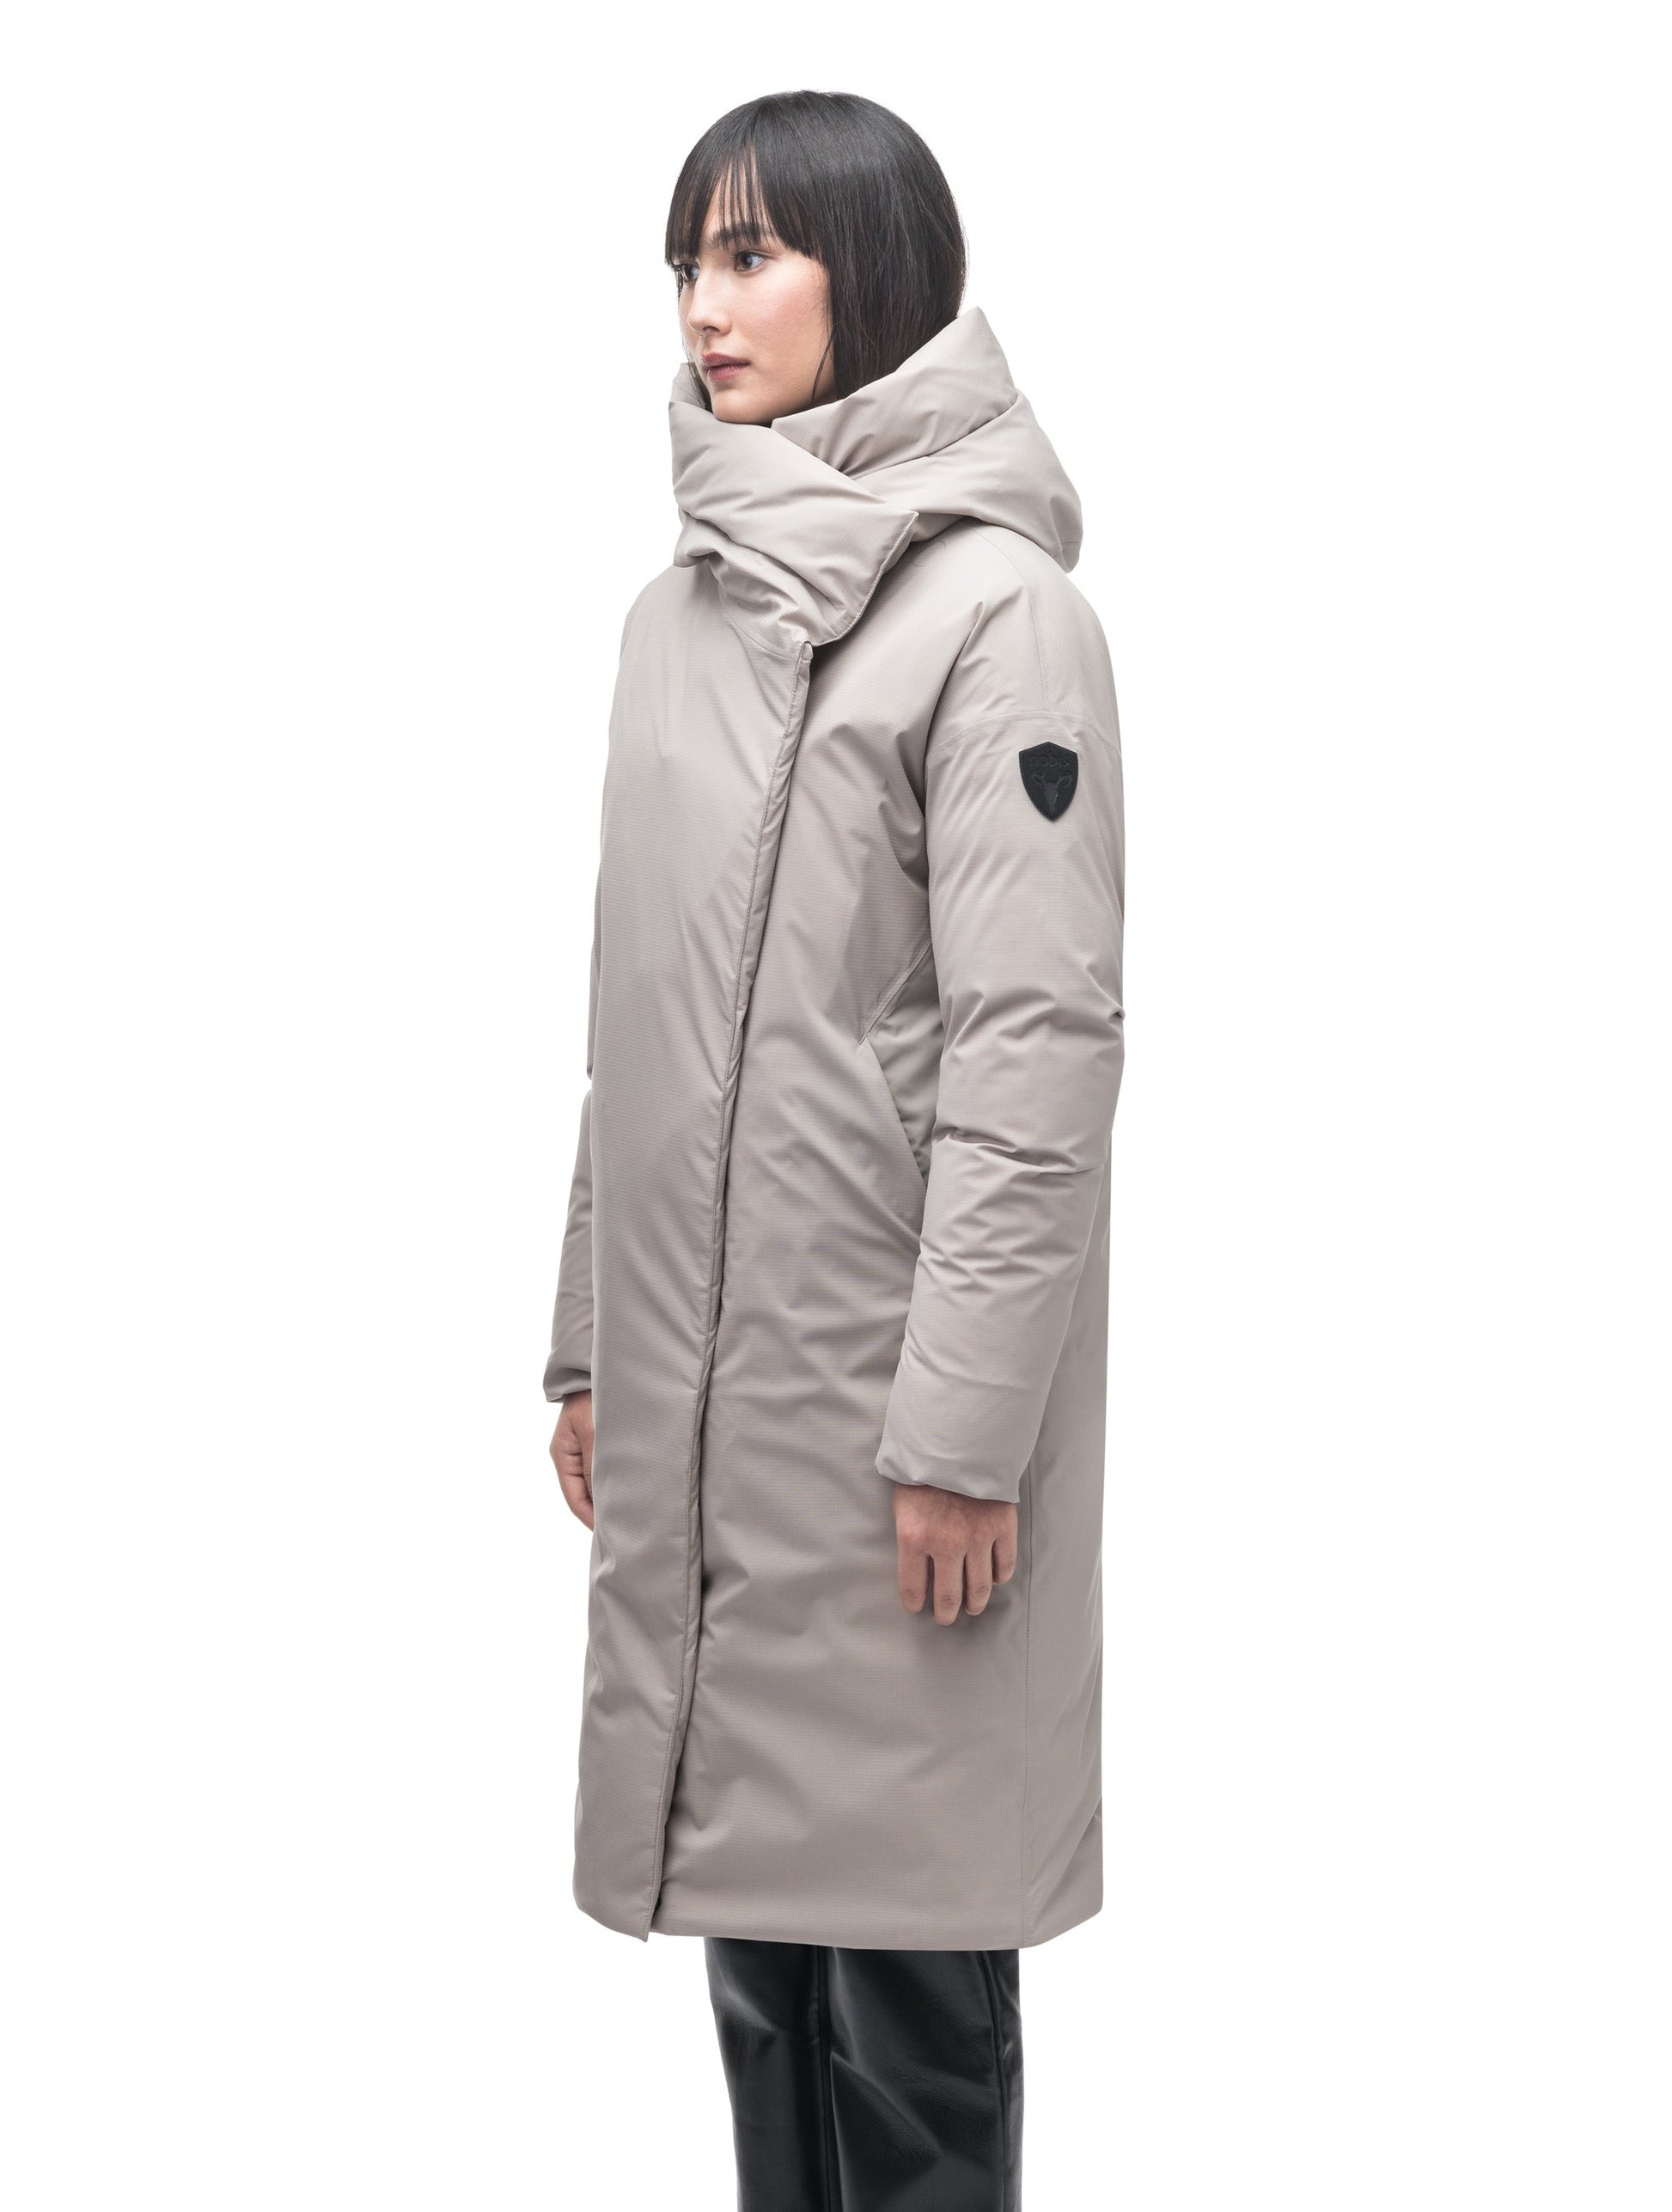 Axis Ladies Oversized Coat in knee length, Canadian duck down insulation, and two-way front zipper, in Clay